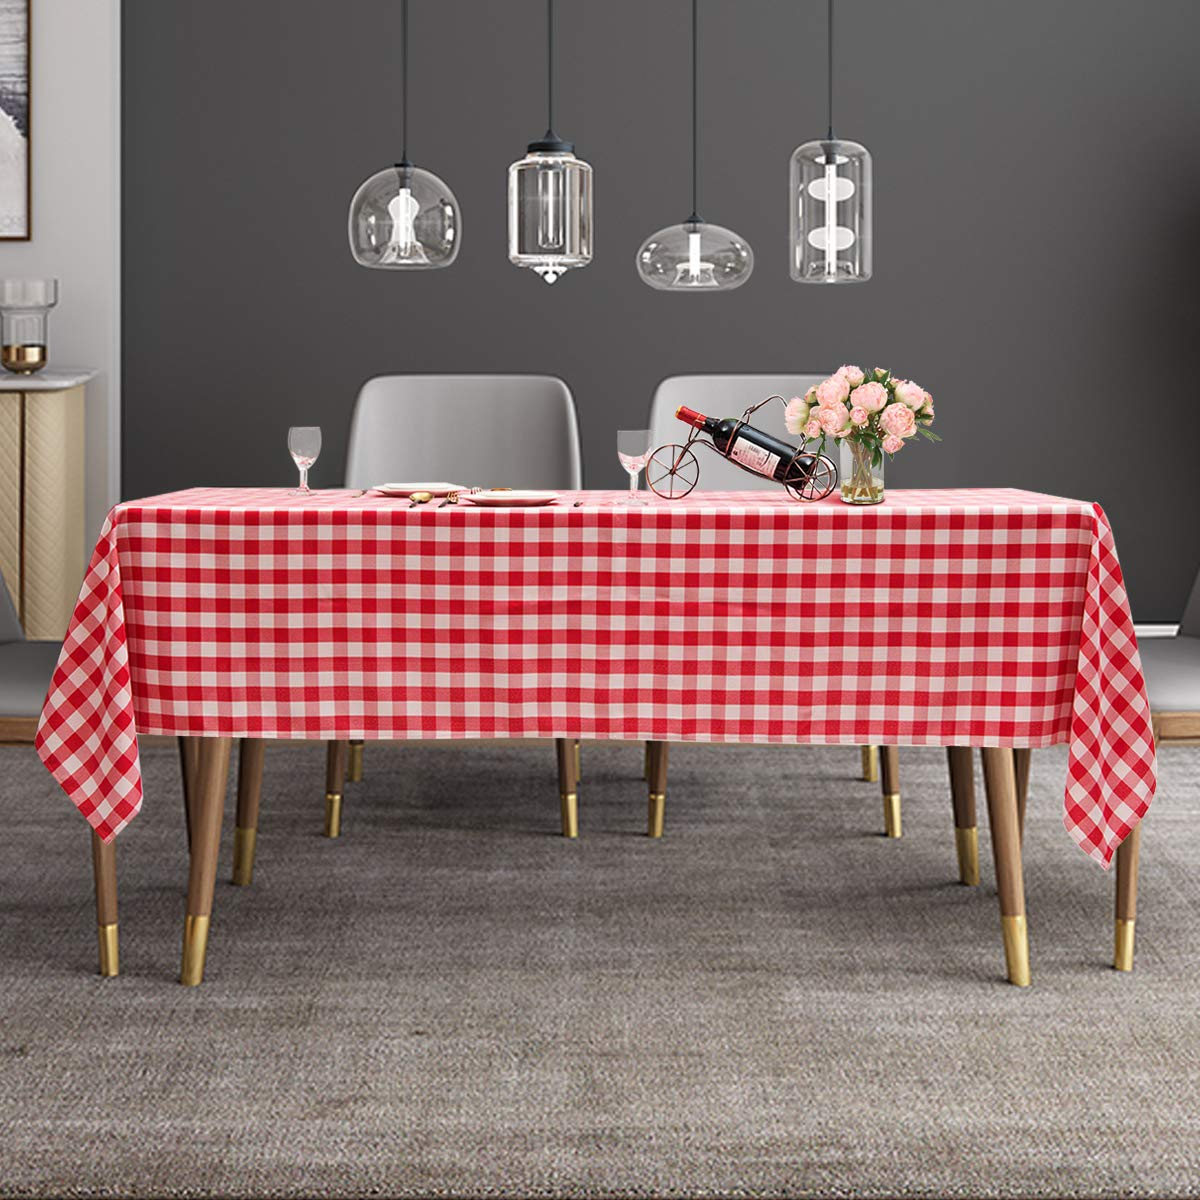 Giantex 10 Checkered Tablecloth Rectangle |60"X102", Stain Resistant, Wrinkle Resistant and Spill Proof Gingham Table Cloths